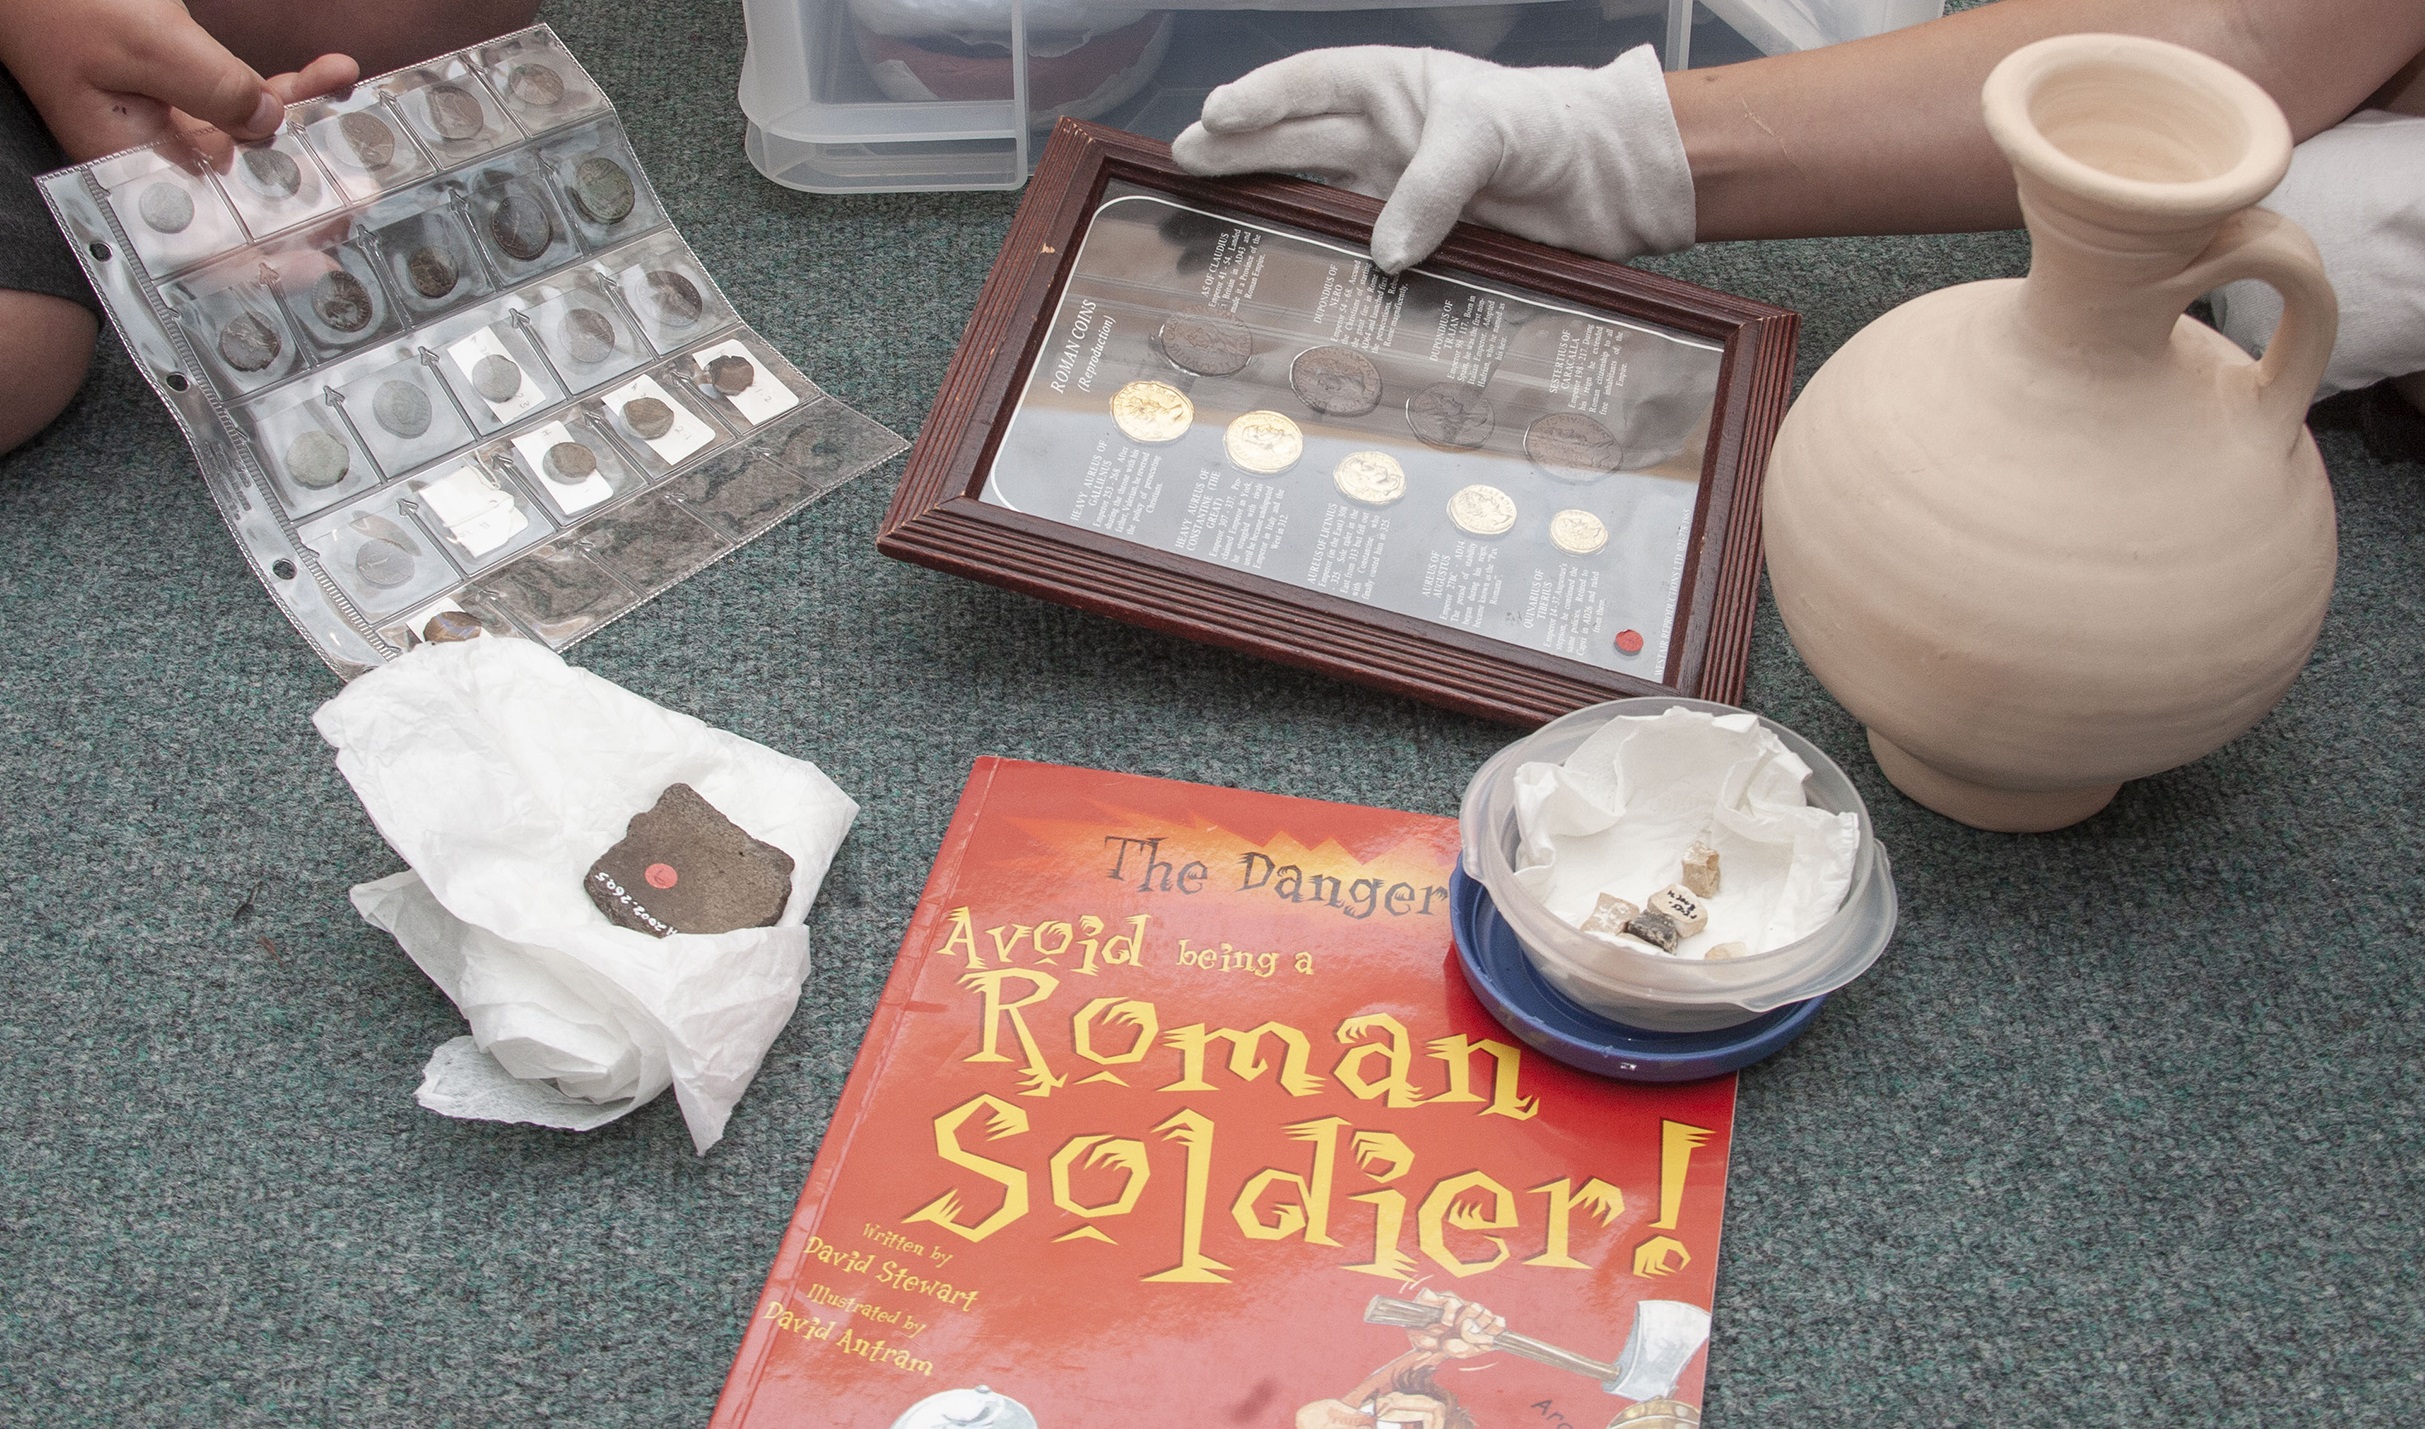 Hands wearing white gloves holding a frame with replica coins in. There are other museum objects on the floor around the hands, including a ceramic jug.